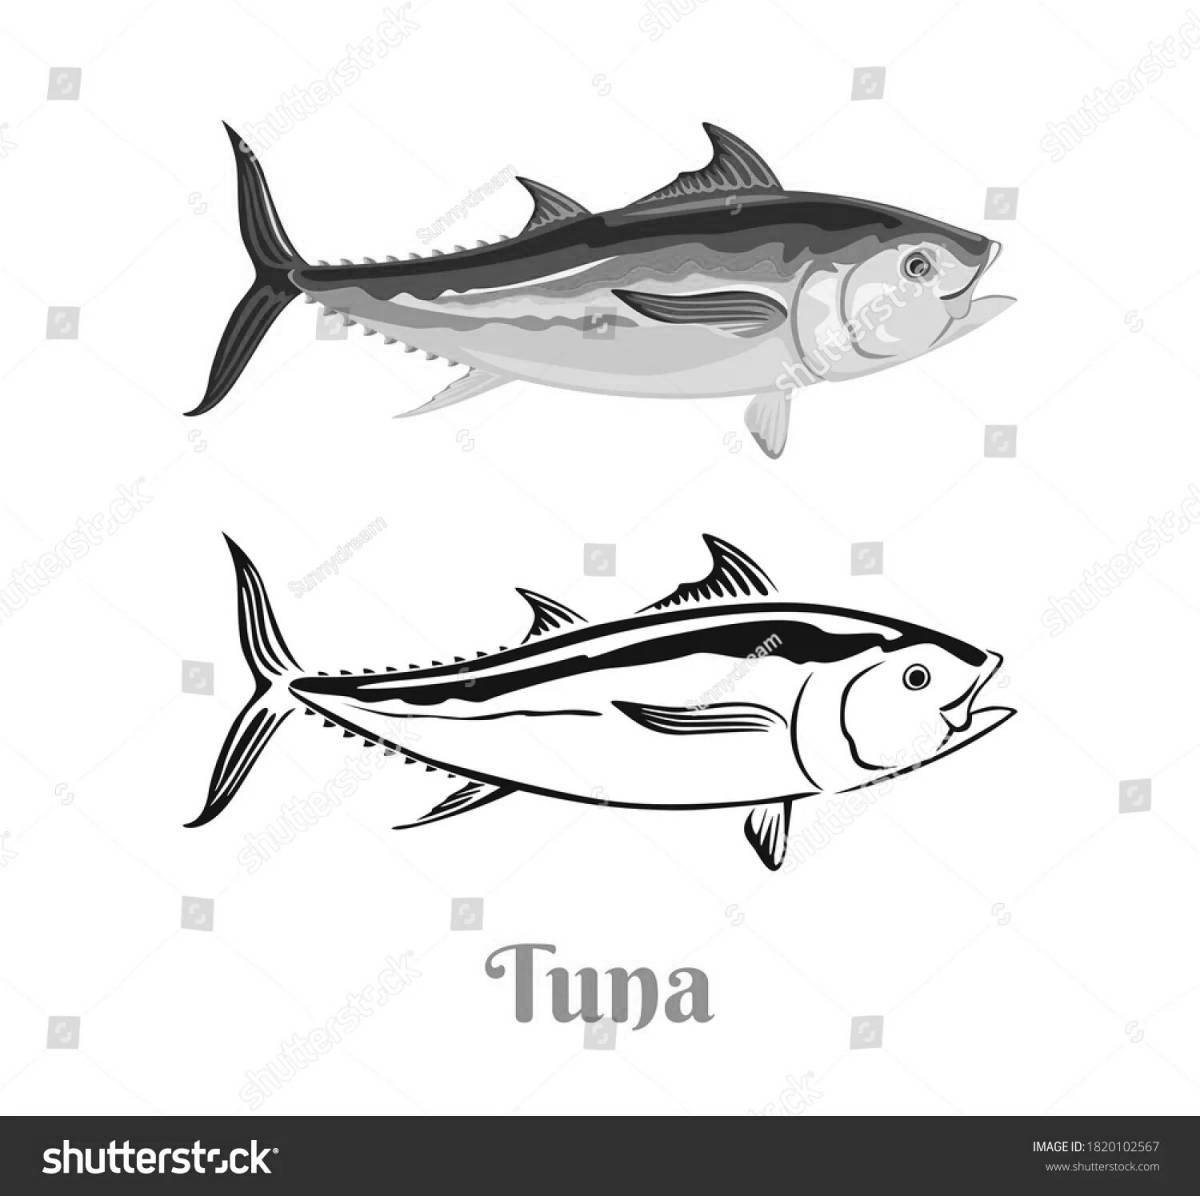 Great tuna coloring page